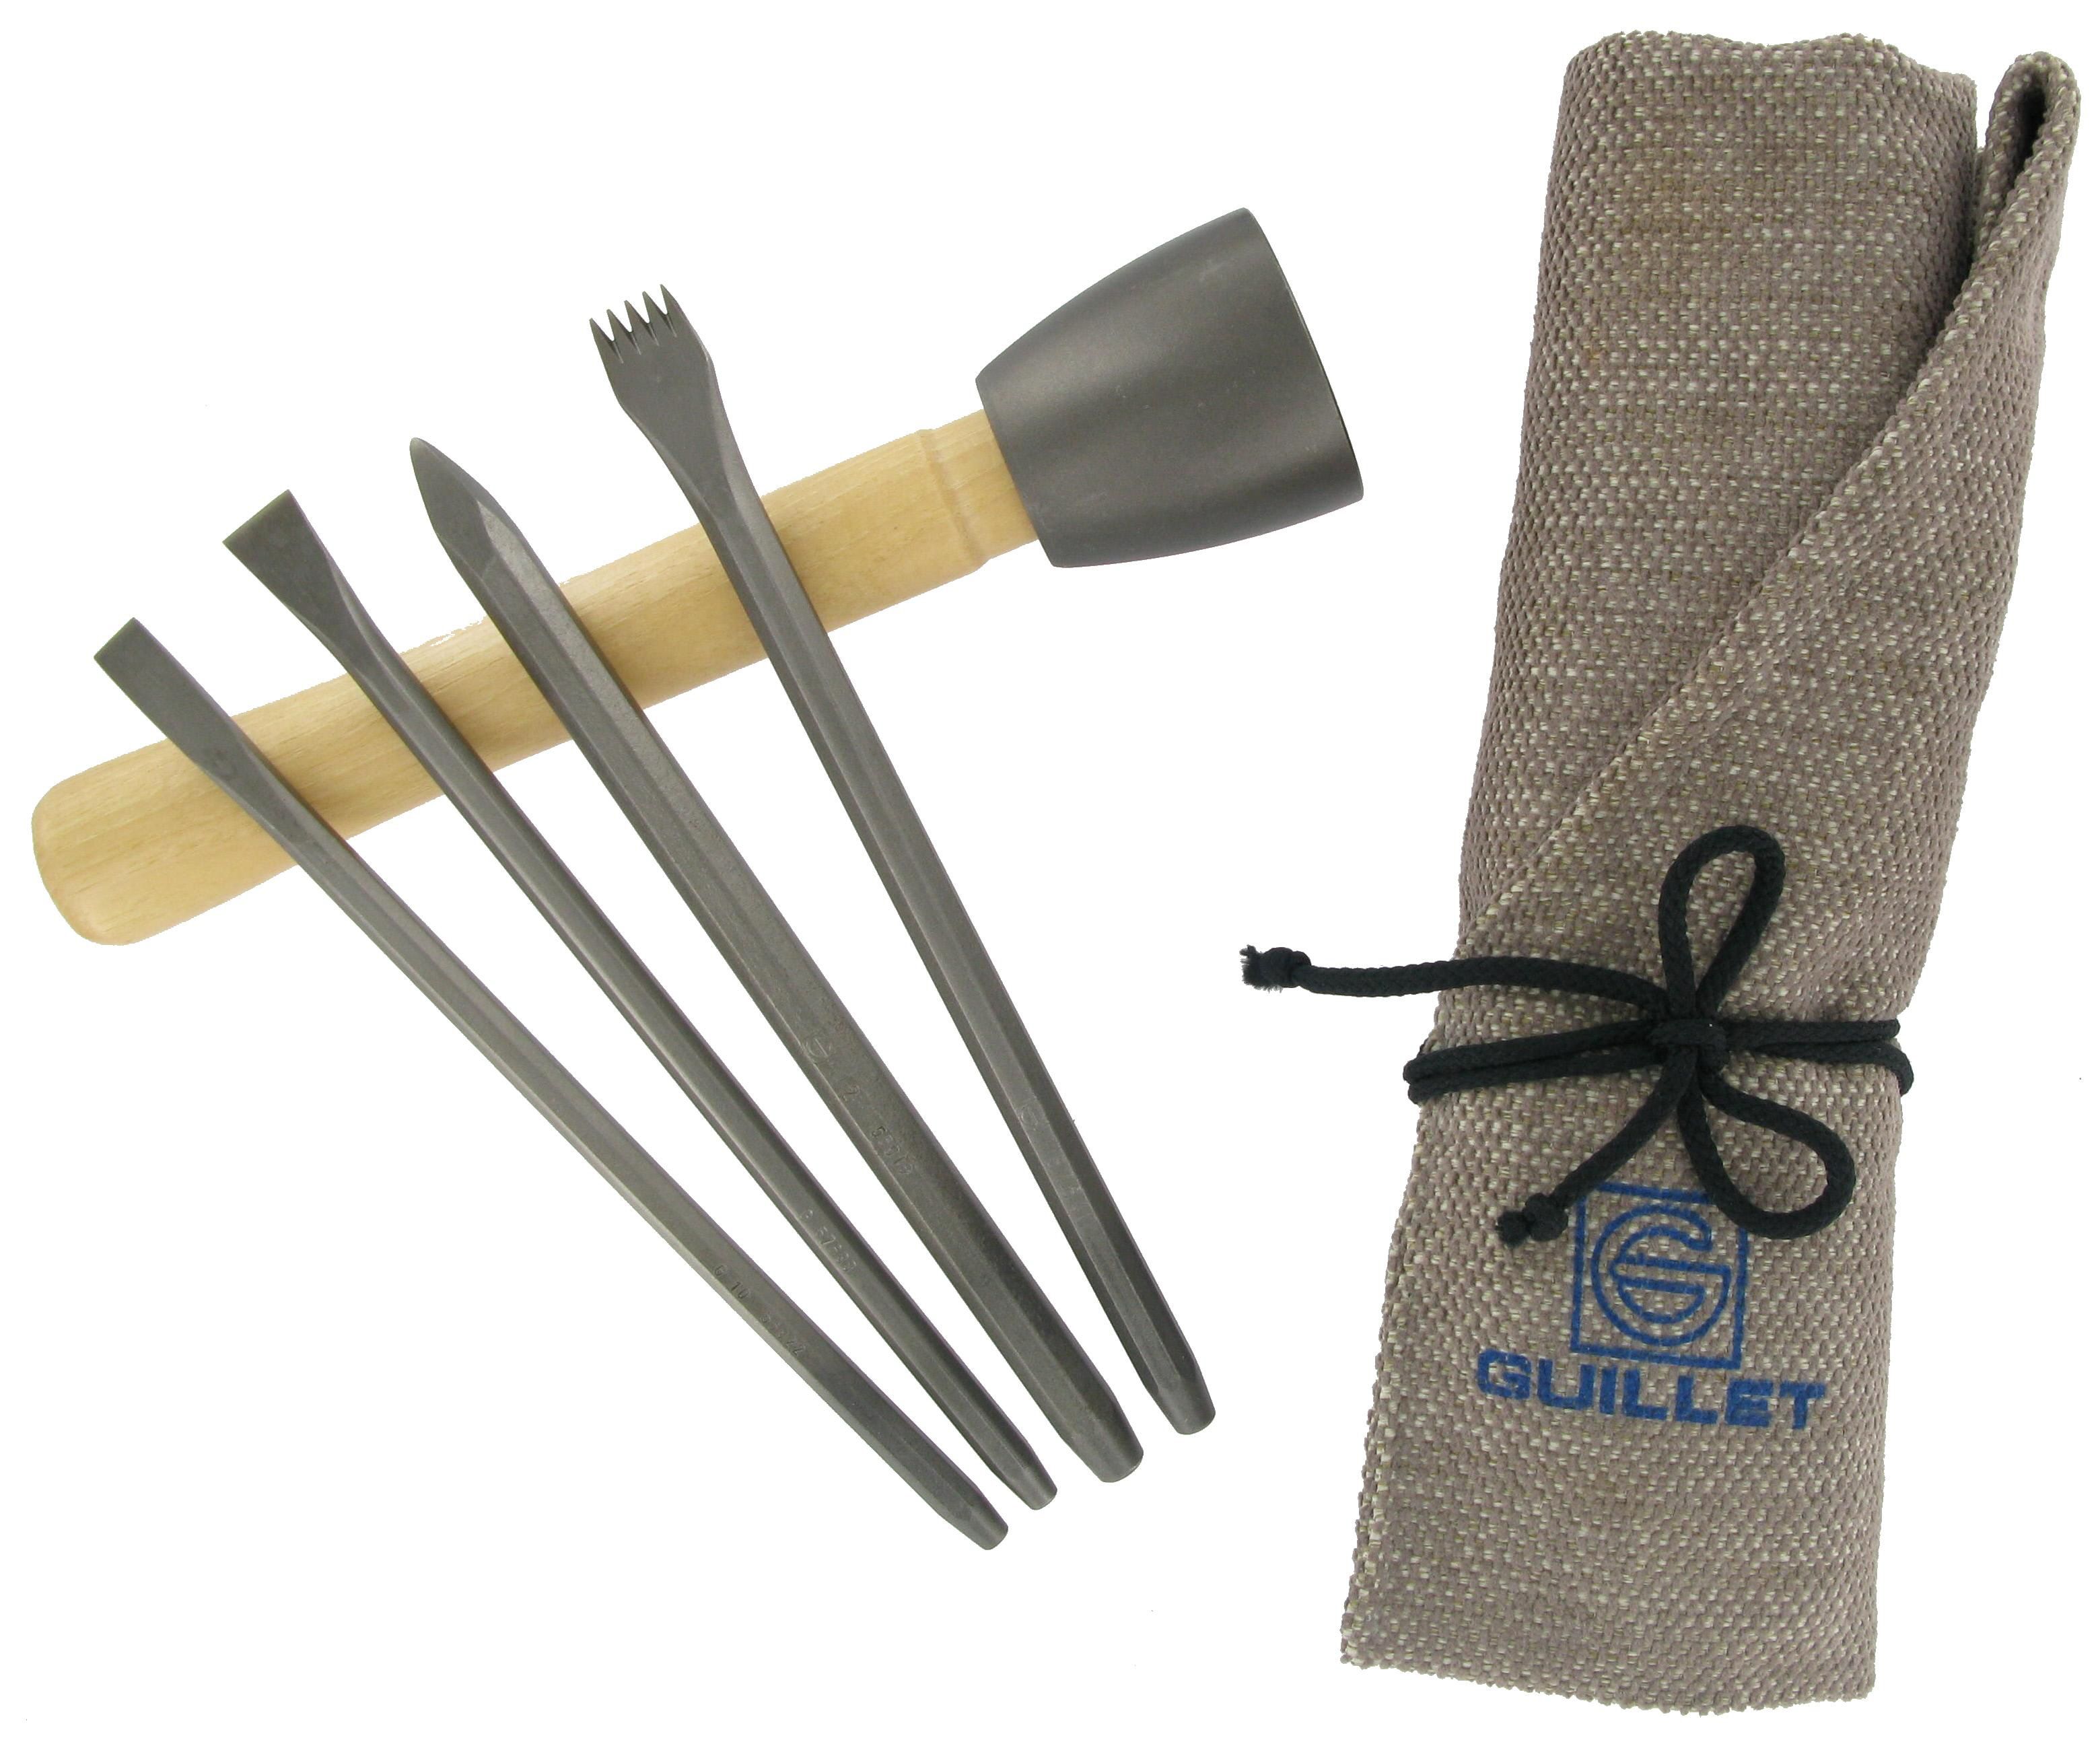 Trousse 5 Outils Initiation Carbure Guillet Fort** 